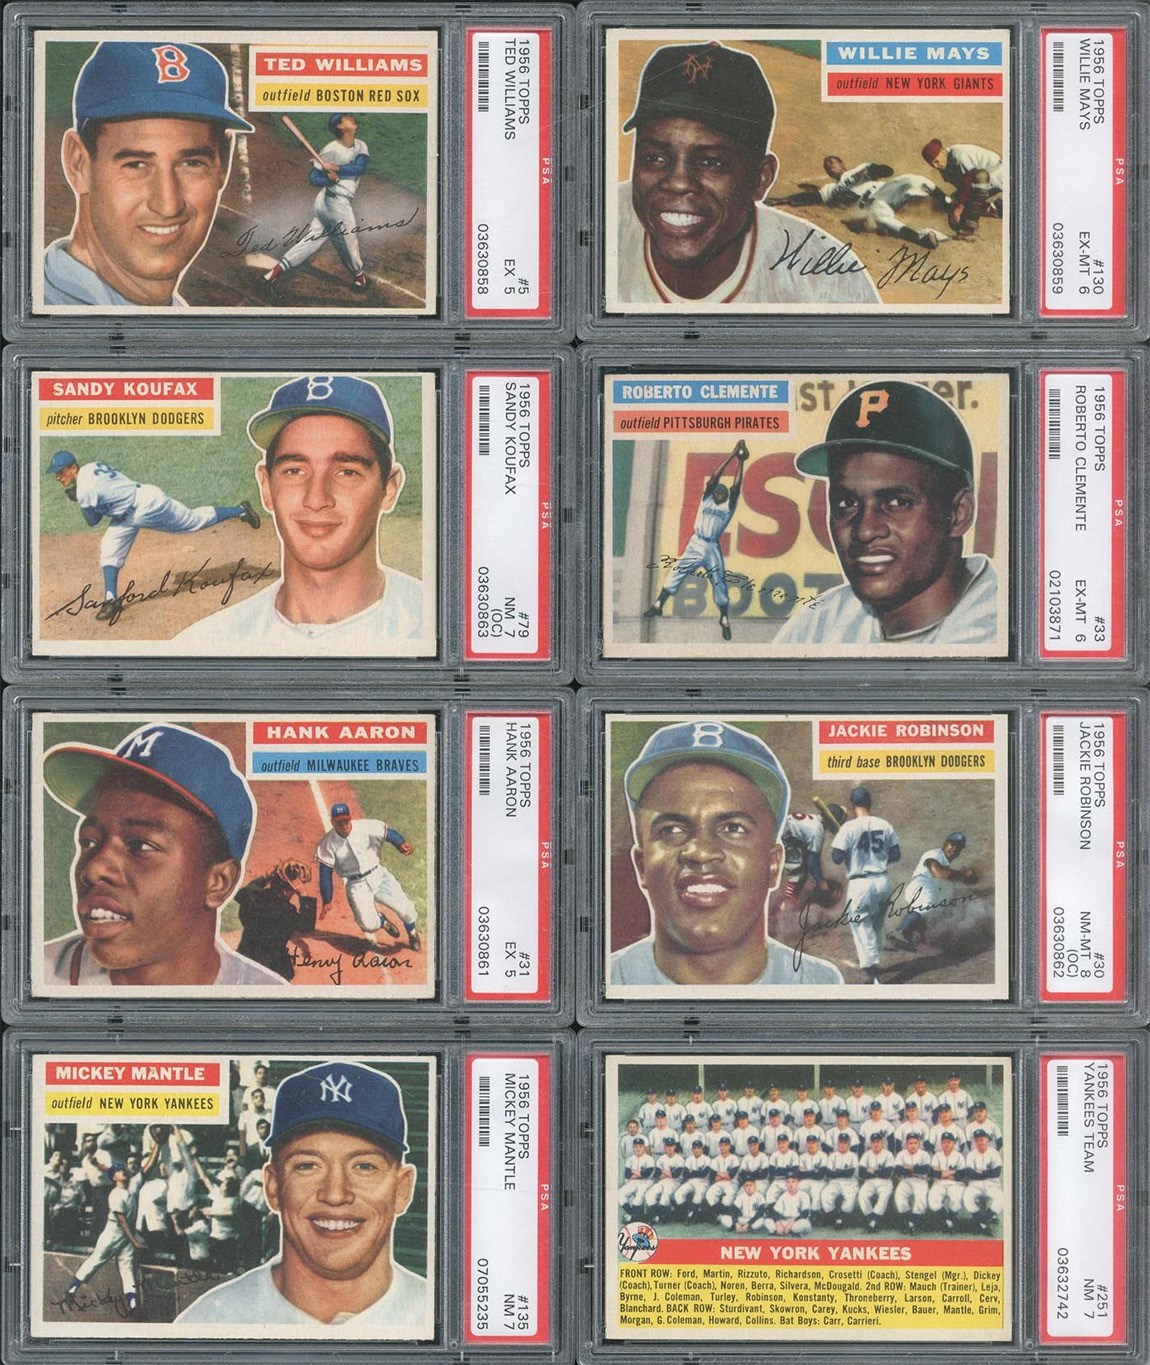 Baseball and Trading Cards - High Grade 1956 Topps PSA Graded Complete Set (340/340)